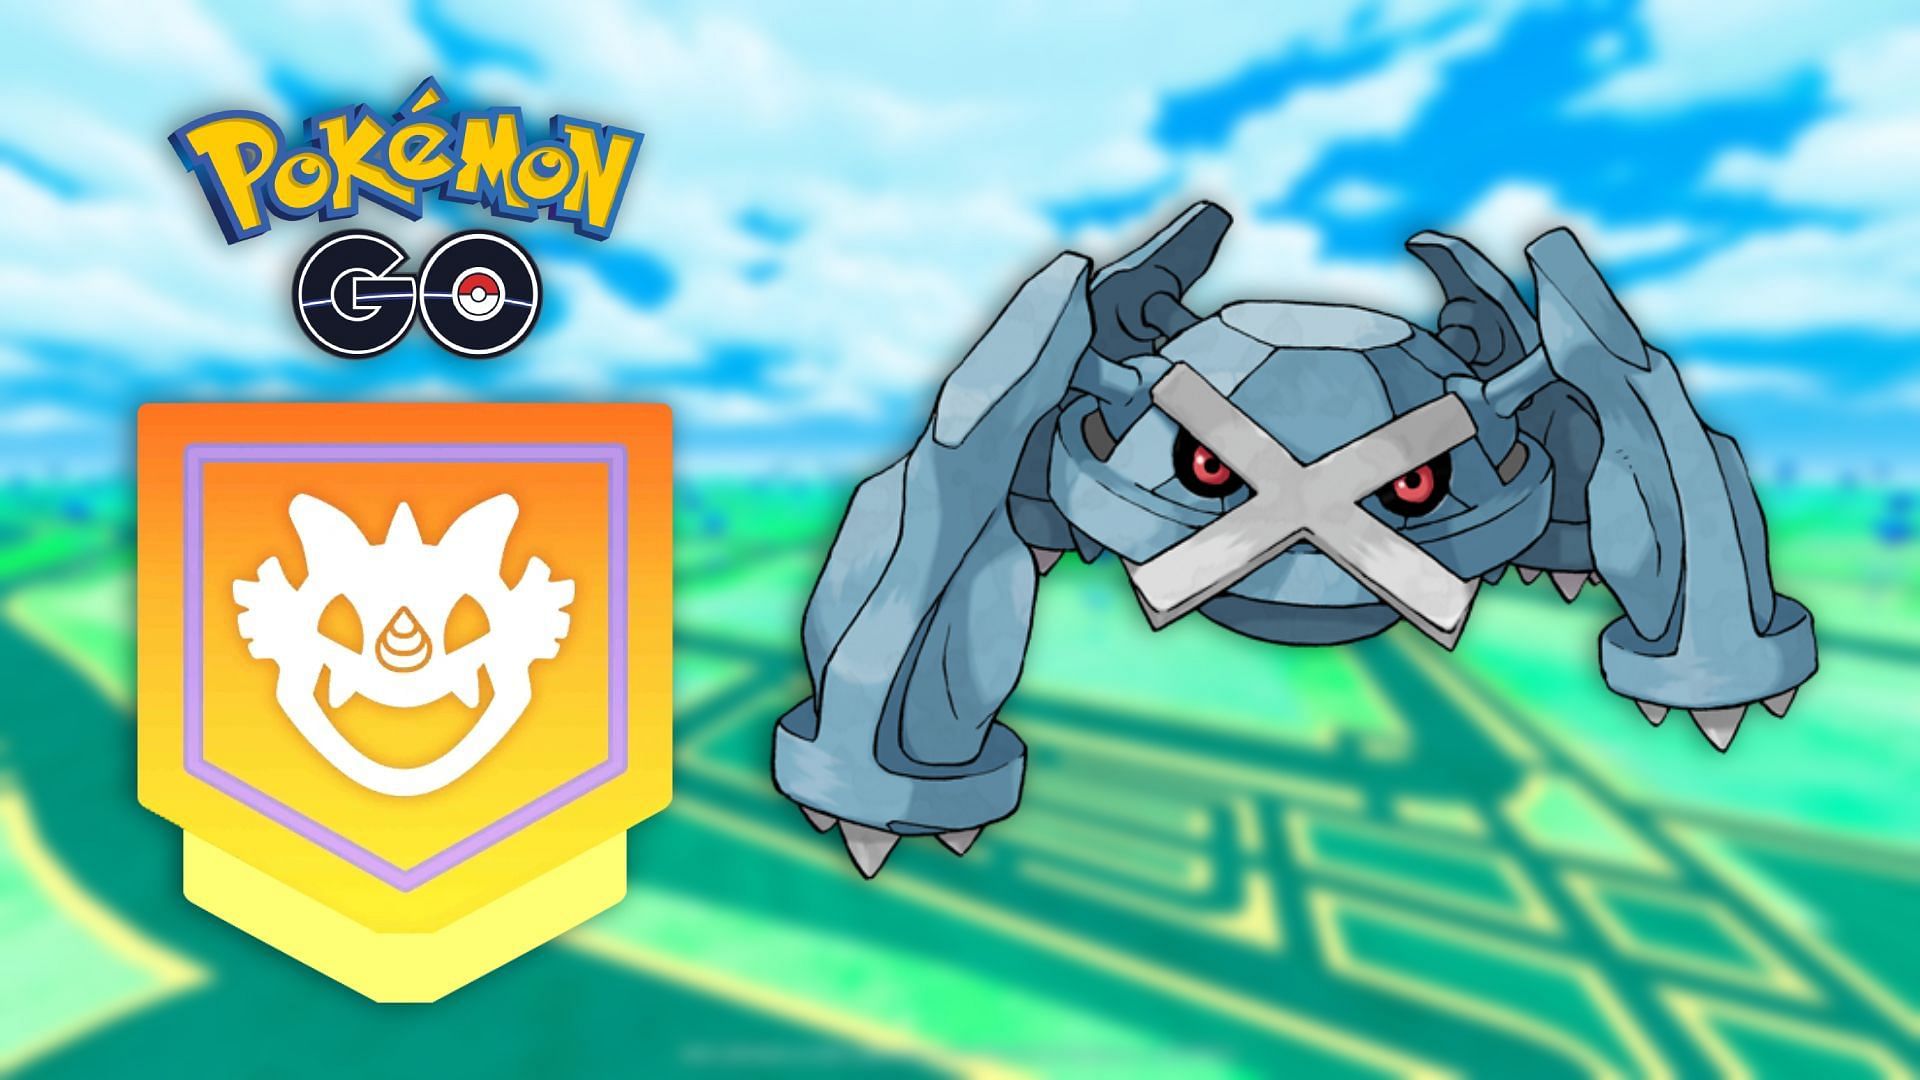 Metagross (Pokémon GO) - Best Movesets, Counters, Evolutions and CP